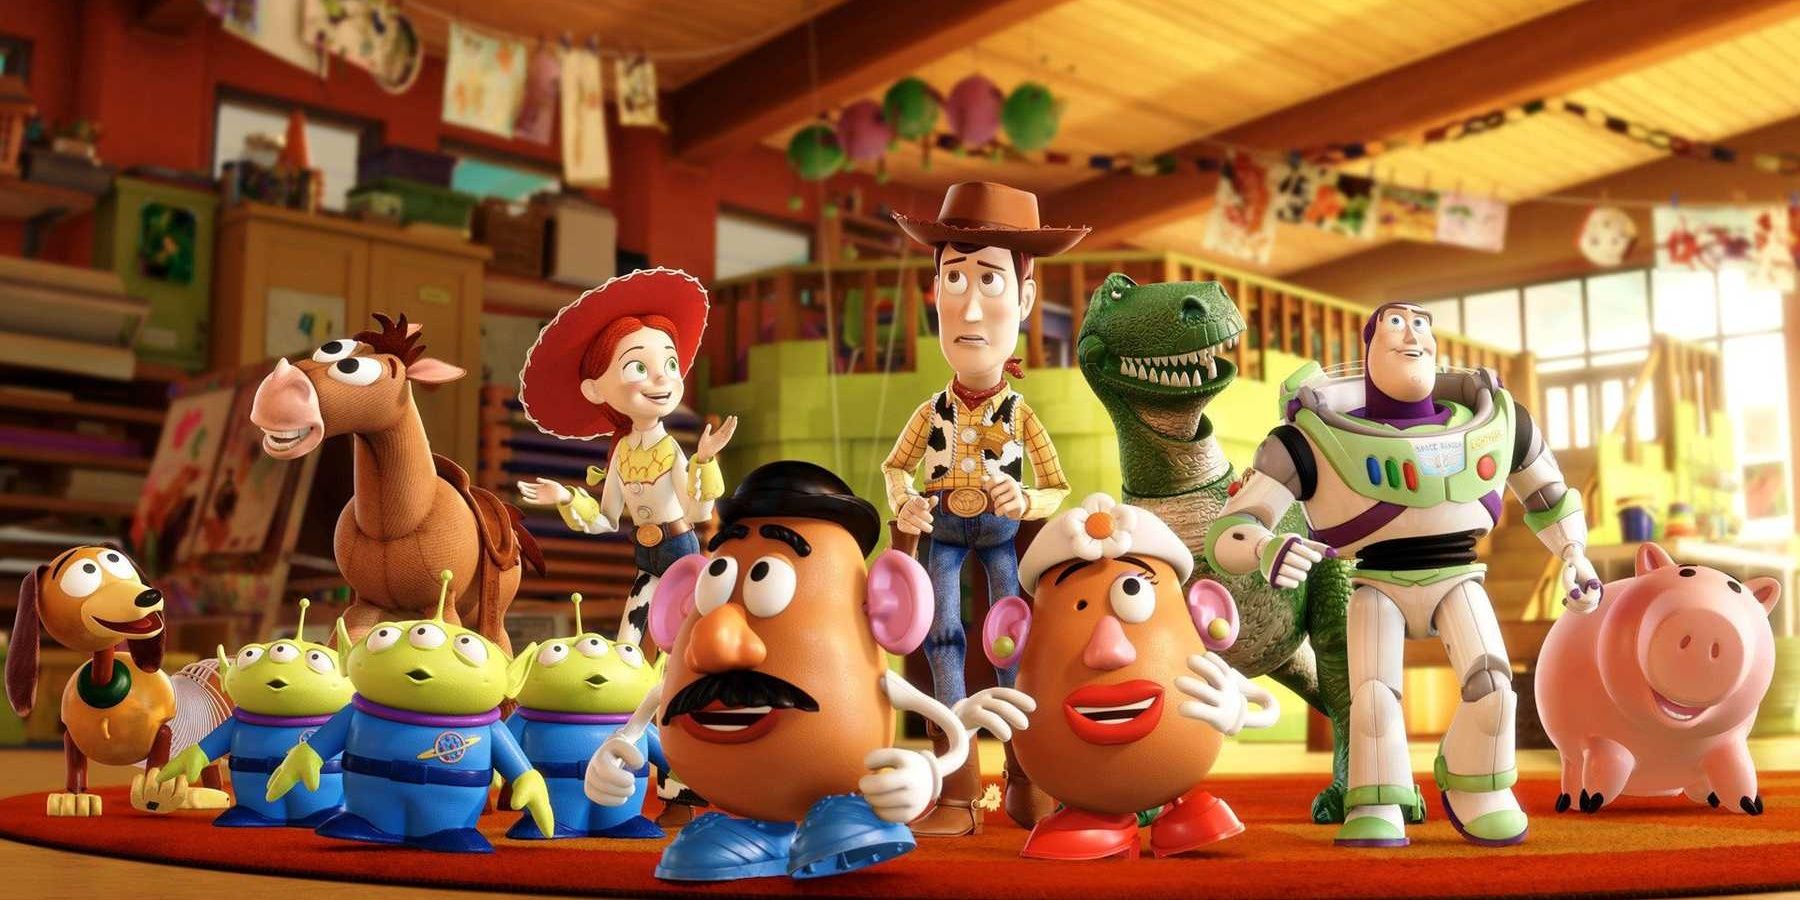 The entire Toy Story 3 cast